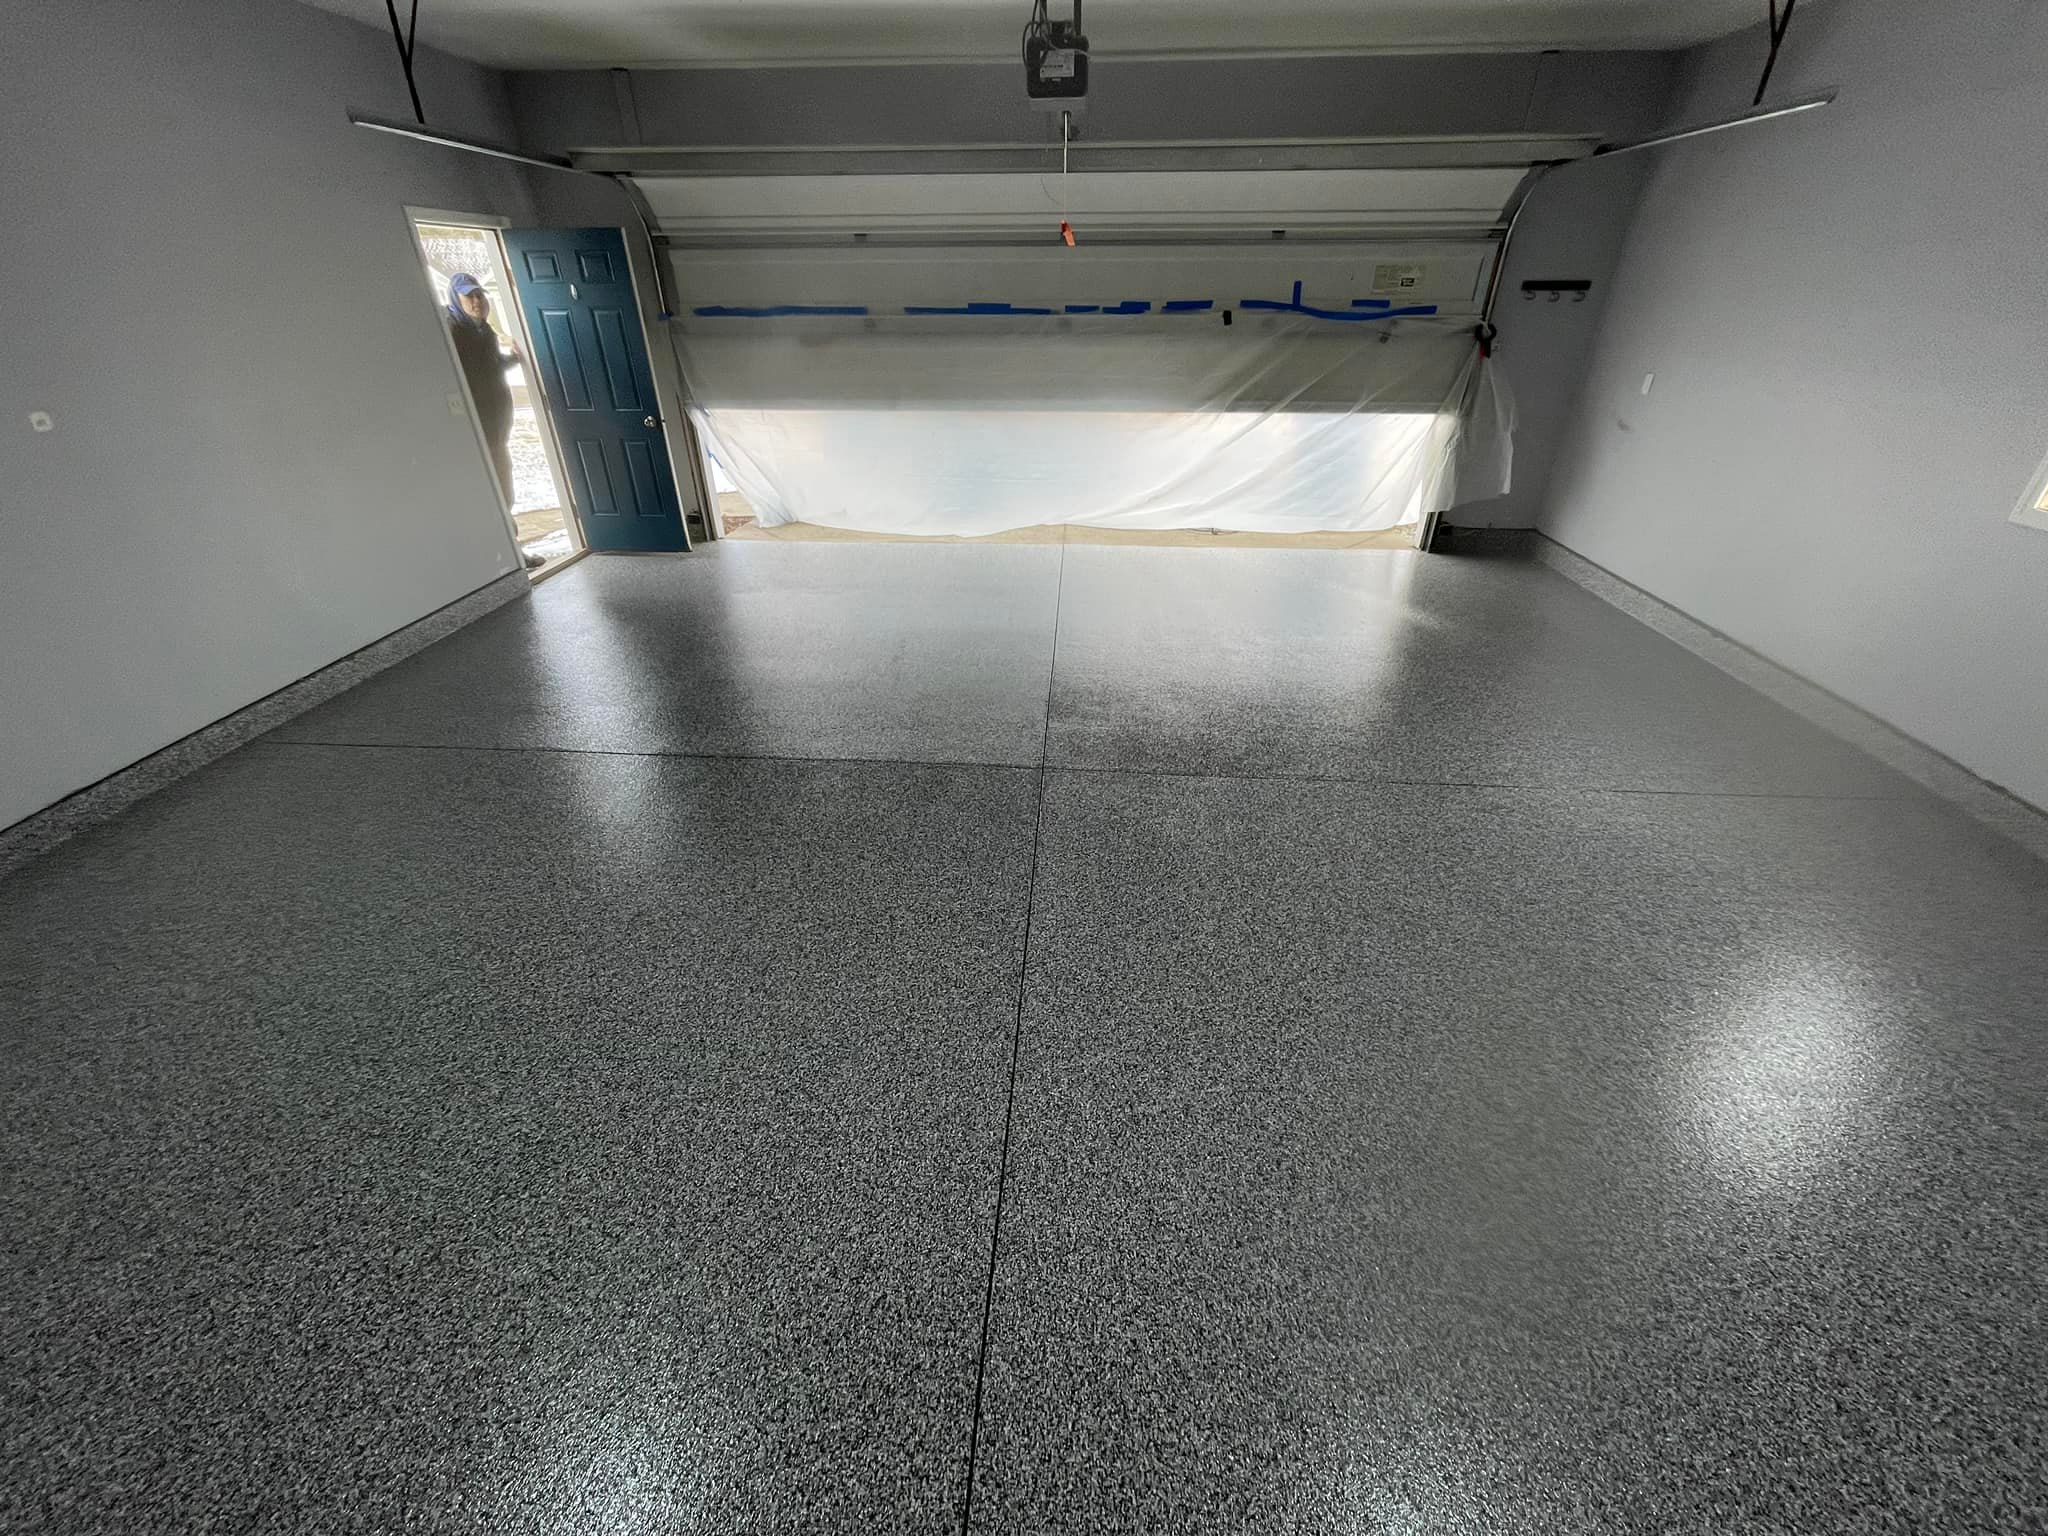 Everything You Need to Know About Installing EpoxyShield Garage Floor Coating